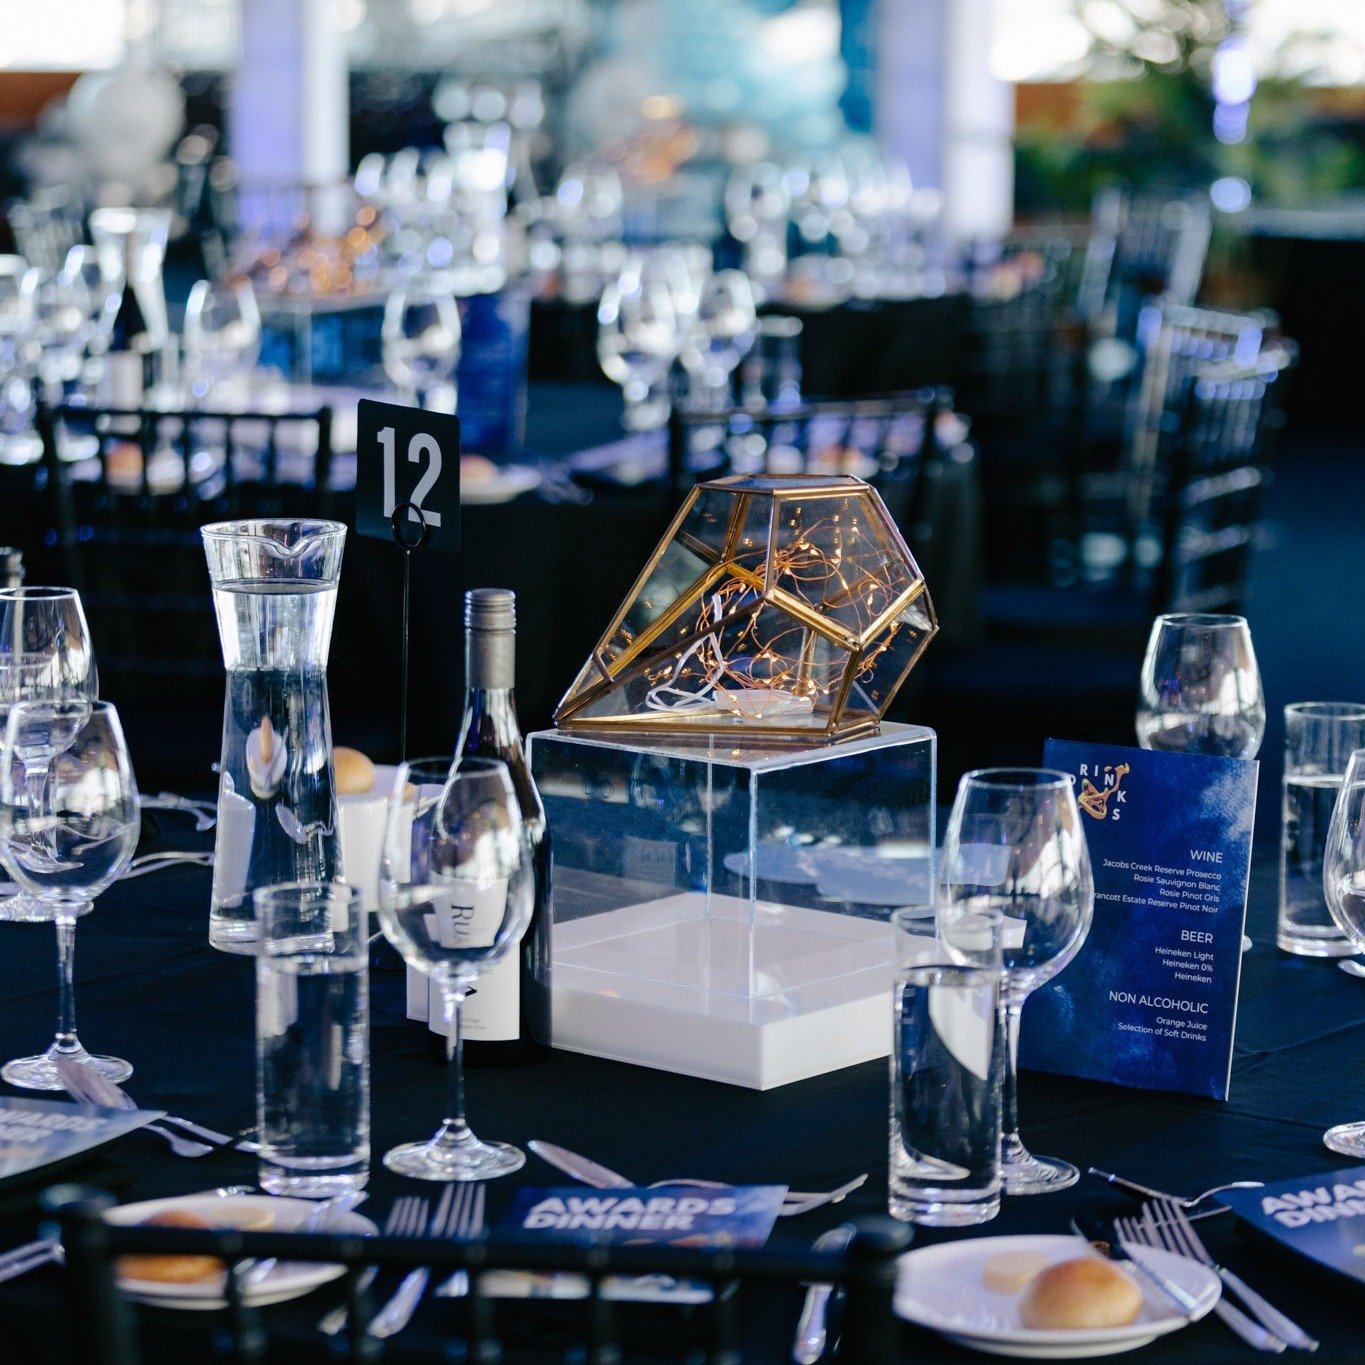 It's time to get your Gala Dinner bookings locked in! Bookings are filling up for the season &ndash; if you want your dream venue or favourite suppliers, it&rsquo;s time to start reaching out for dates later in the year as they&rsquo;re getting snapp